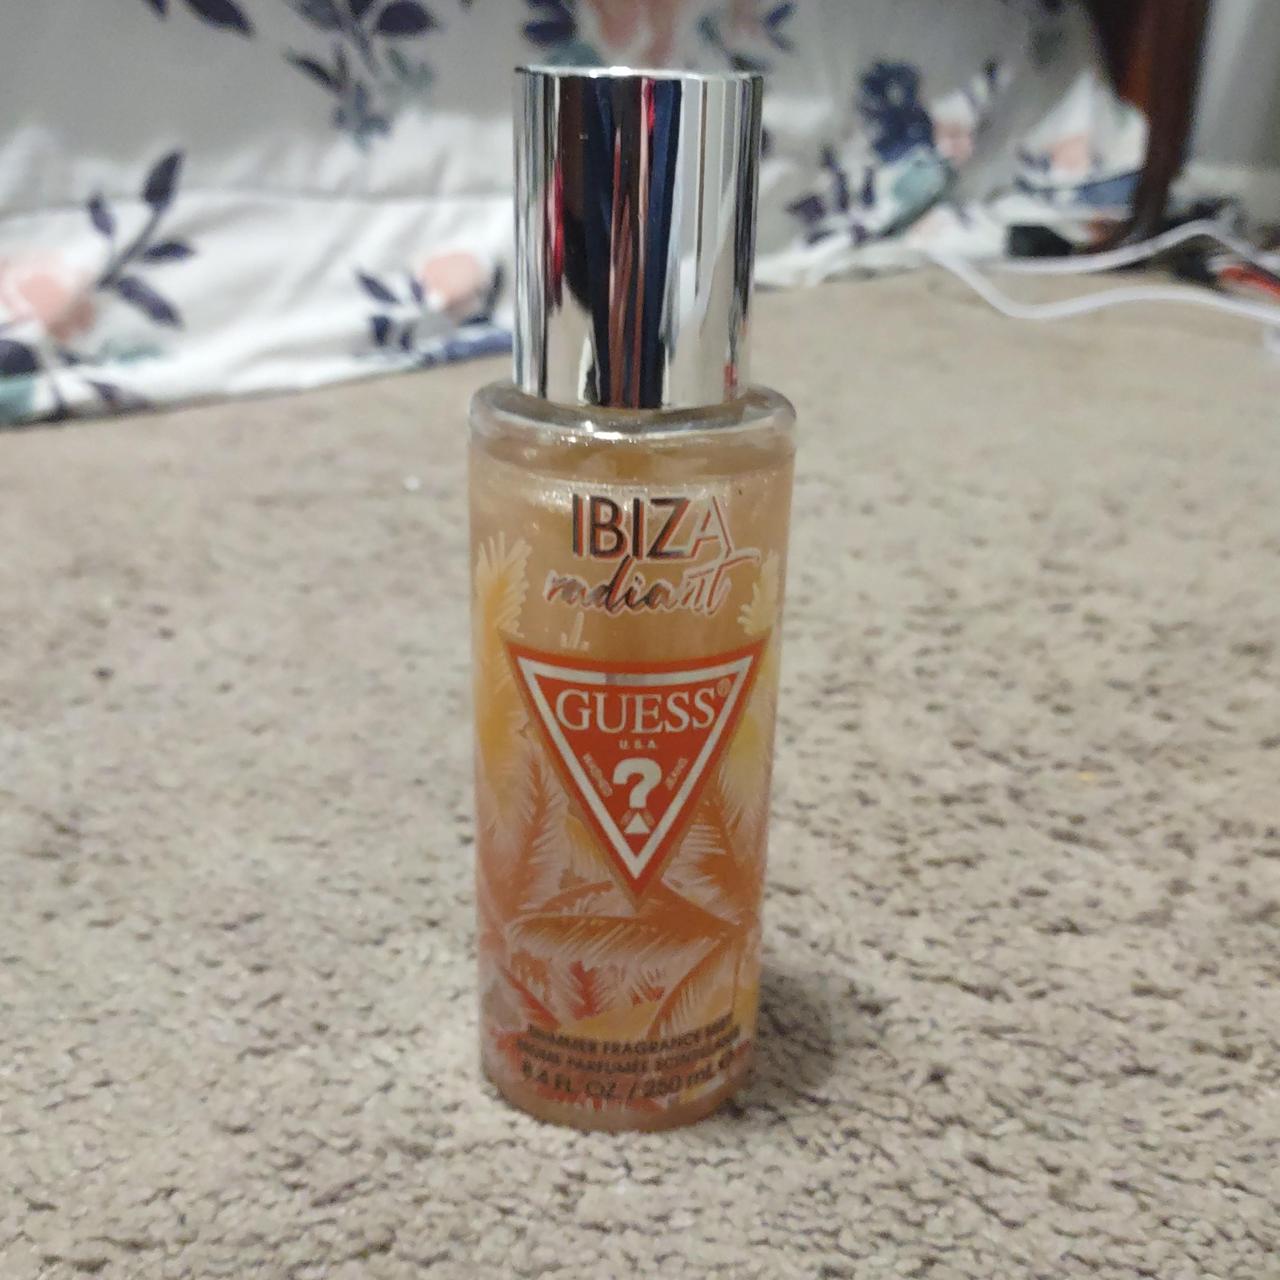 Product Image 1 - guess perfume
scent is Ibiza radiant
brand